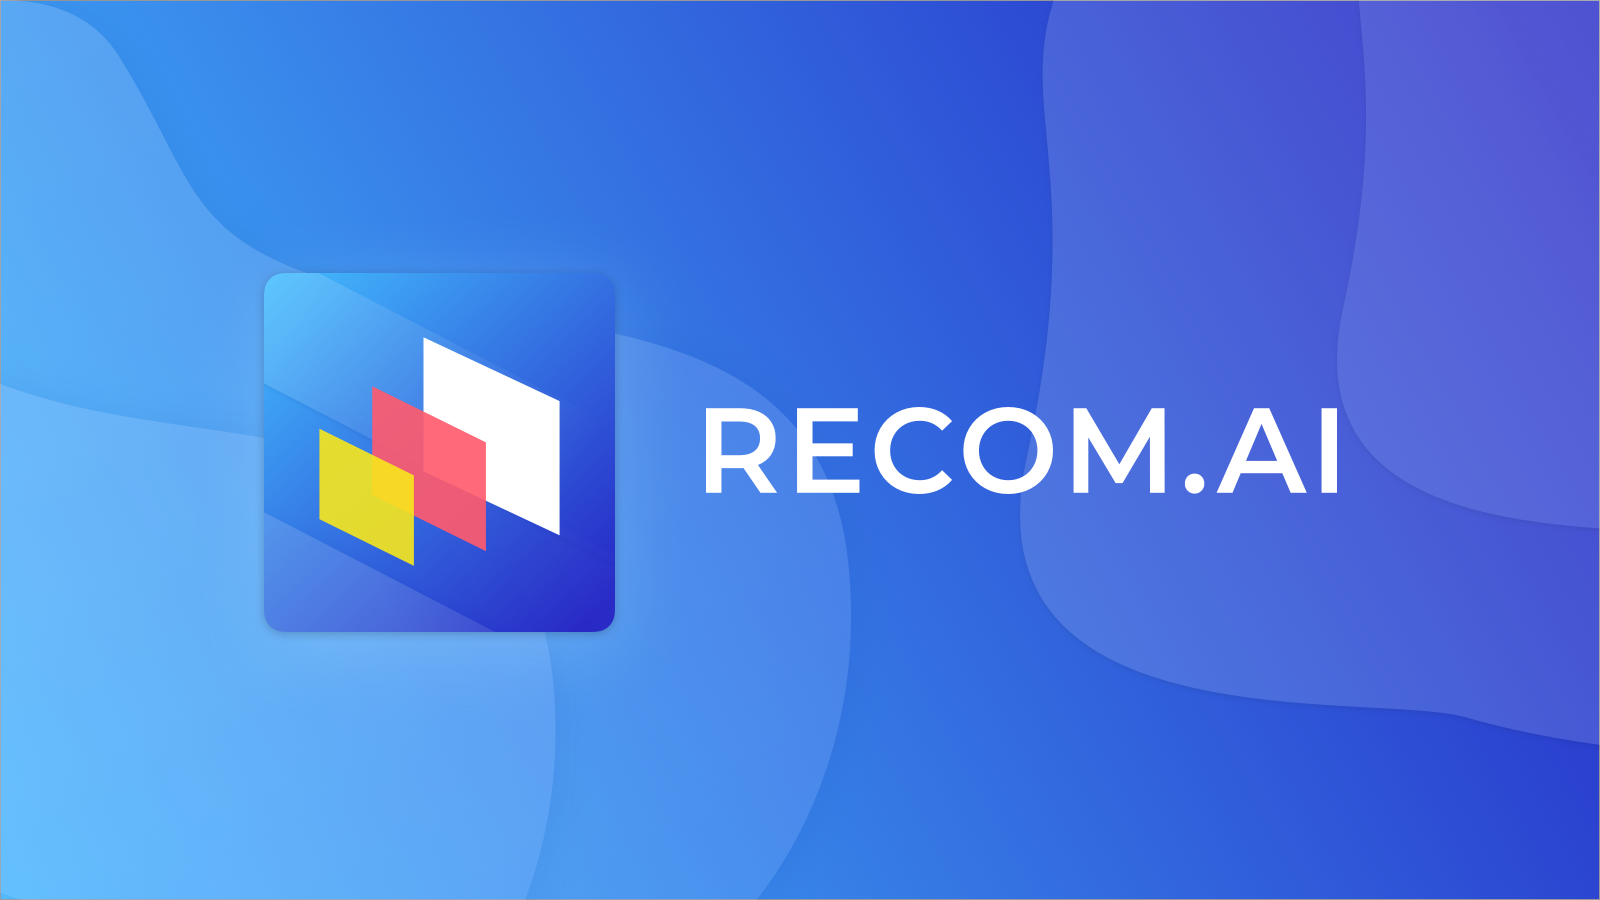 Recom.ai Launches Scout for Personalized Product Recommendations